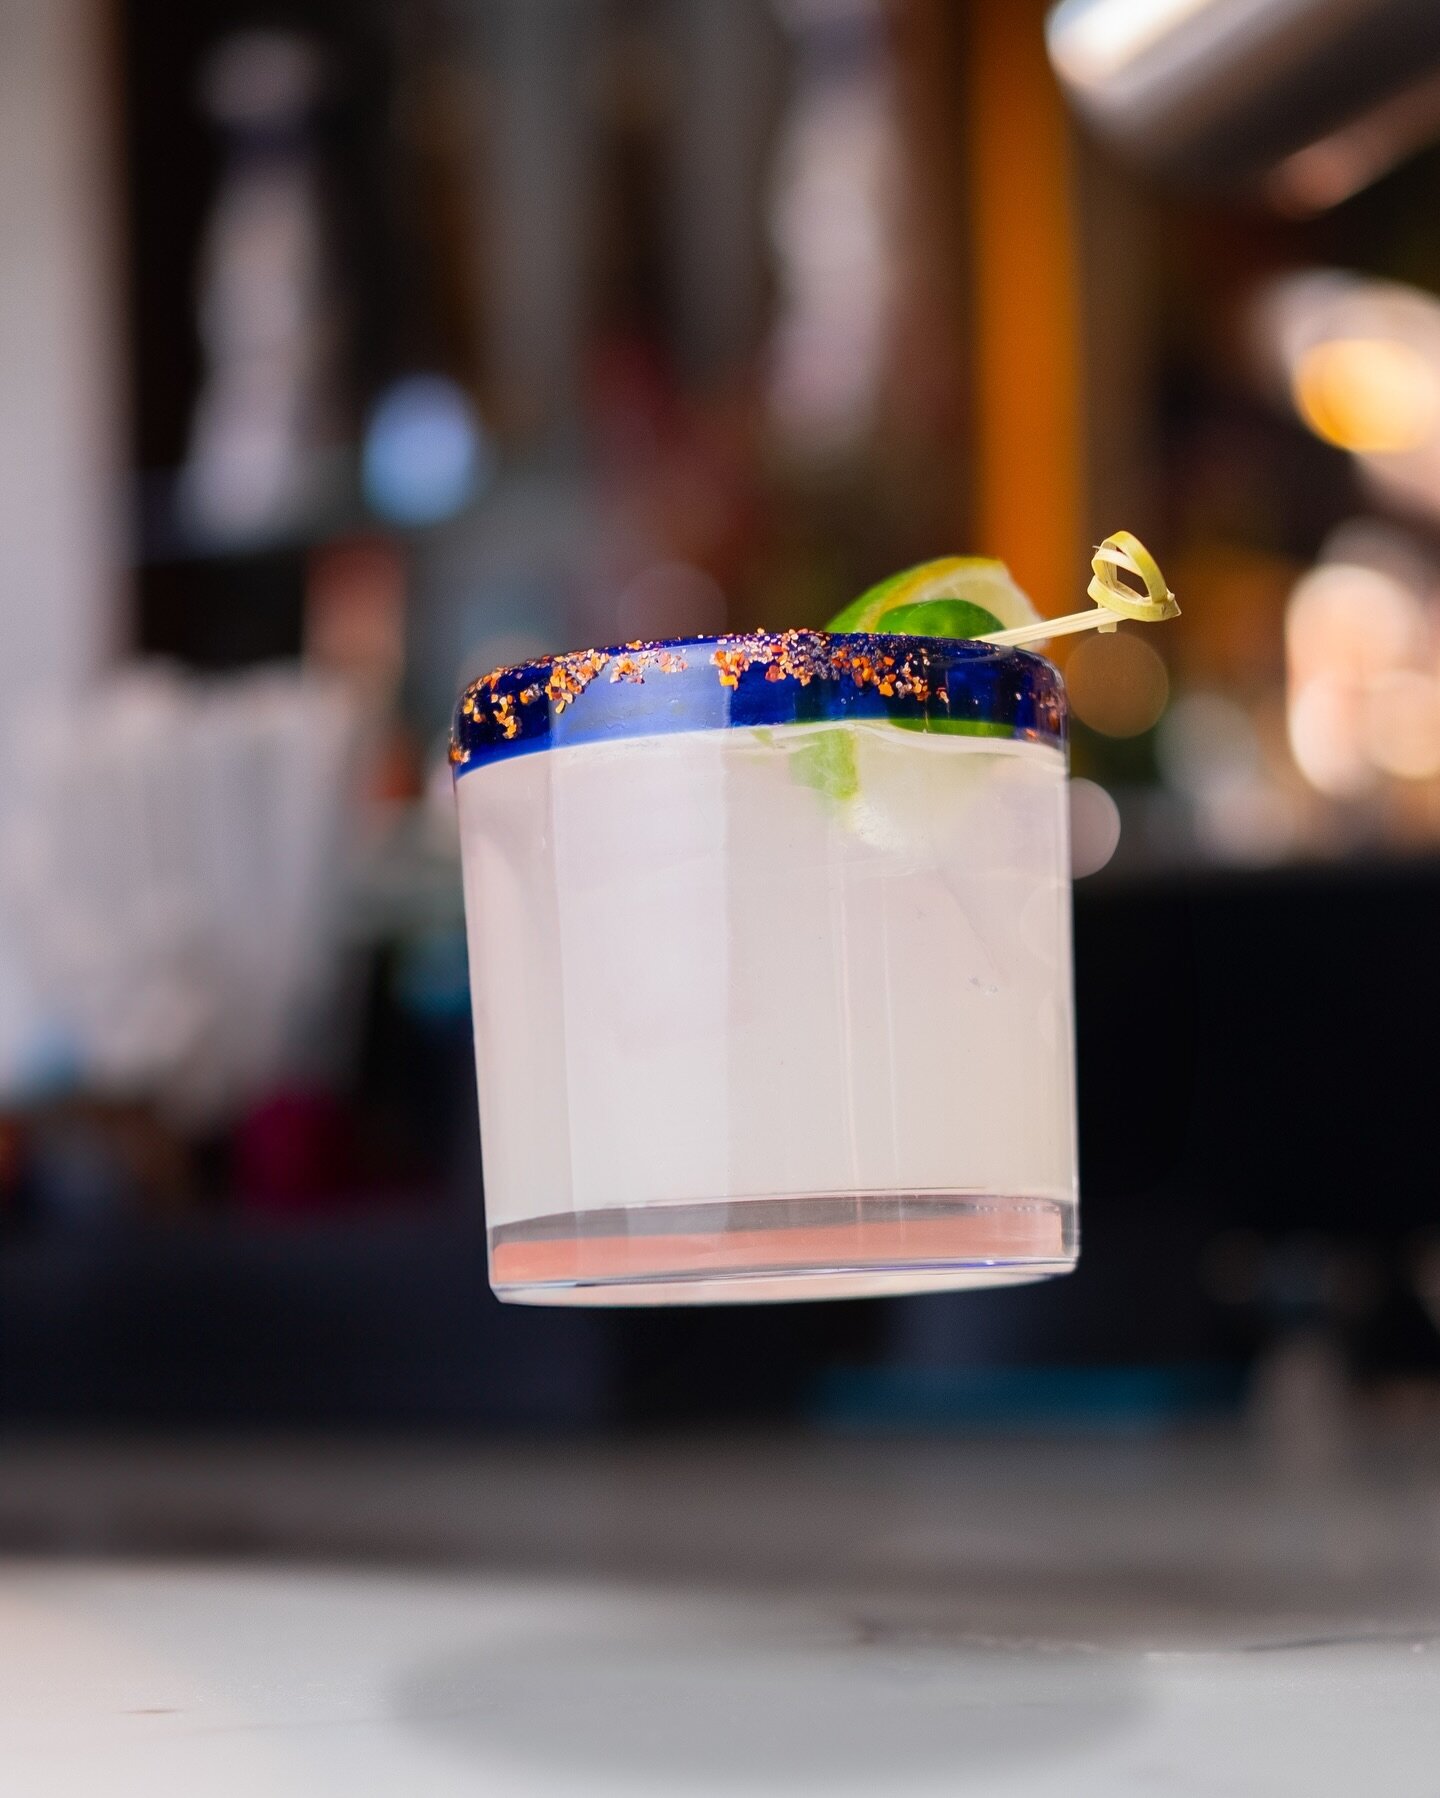 Get hands-on with our cocktails as happy hour starts now at The Grand! Come join us for unbeatable deals on drinks and bites🍹🕔 

🍽️ Tap the link in our bio for reservation &amp; more!

📍The Grand
37-01 30th Avenue
📞 (718) 806-1504